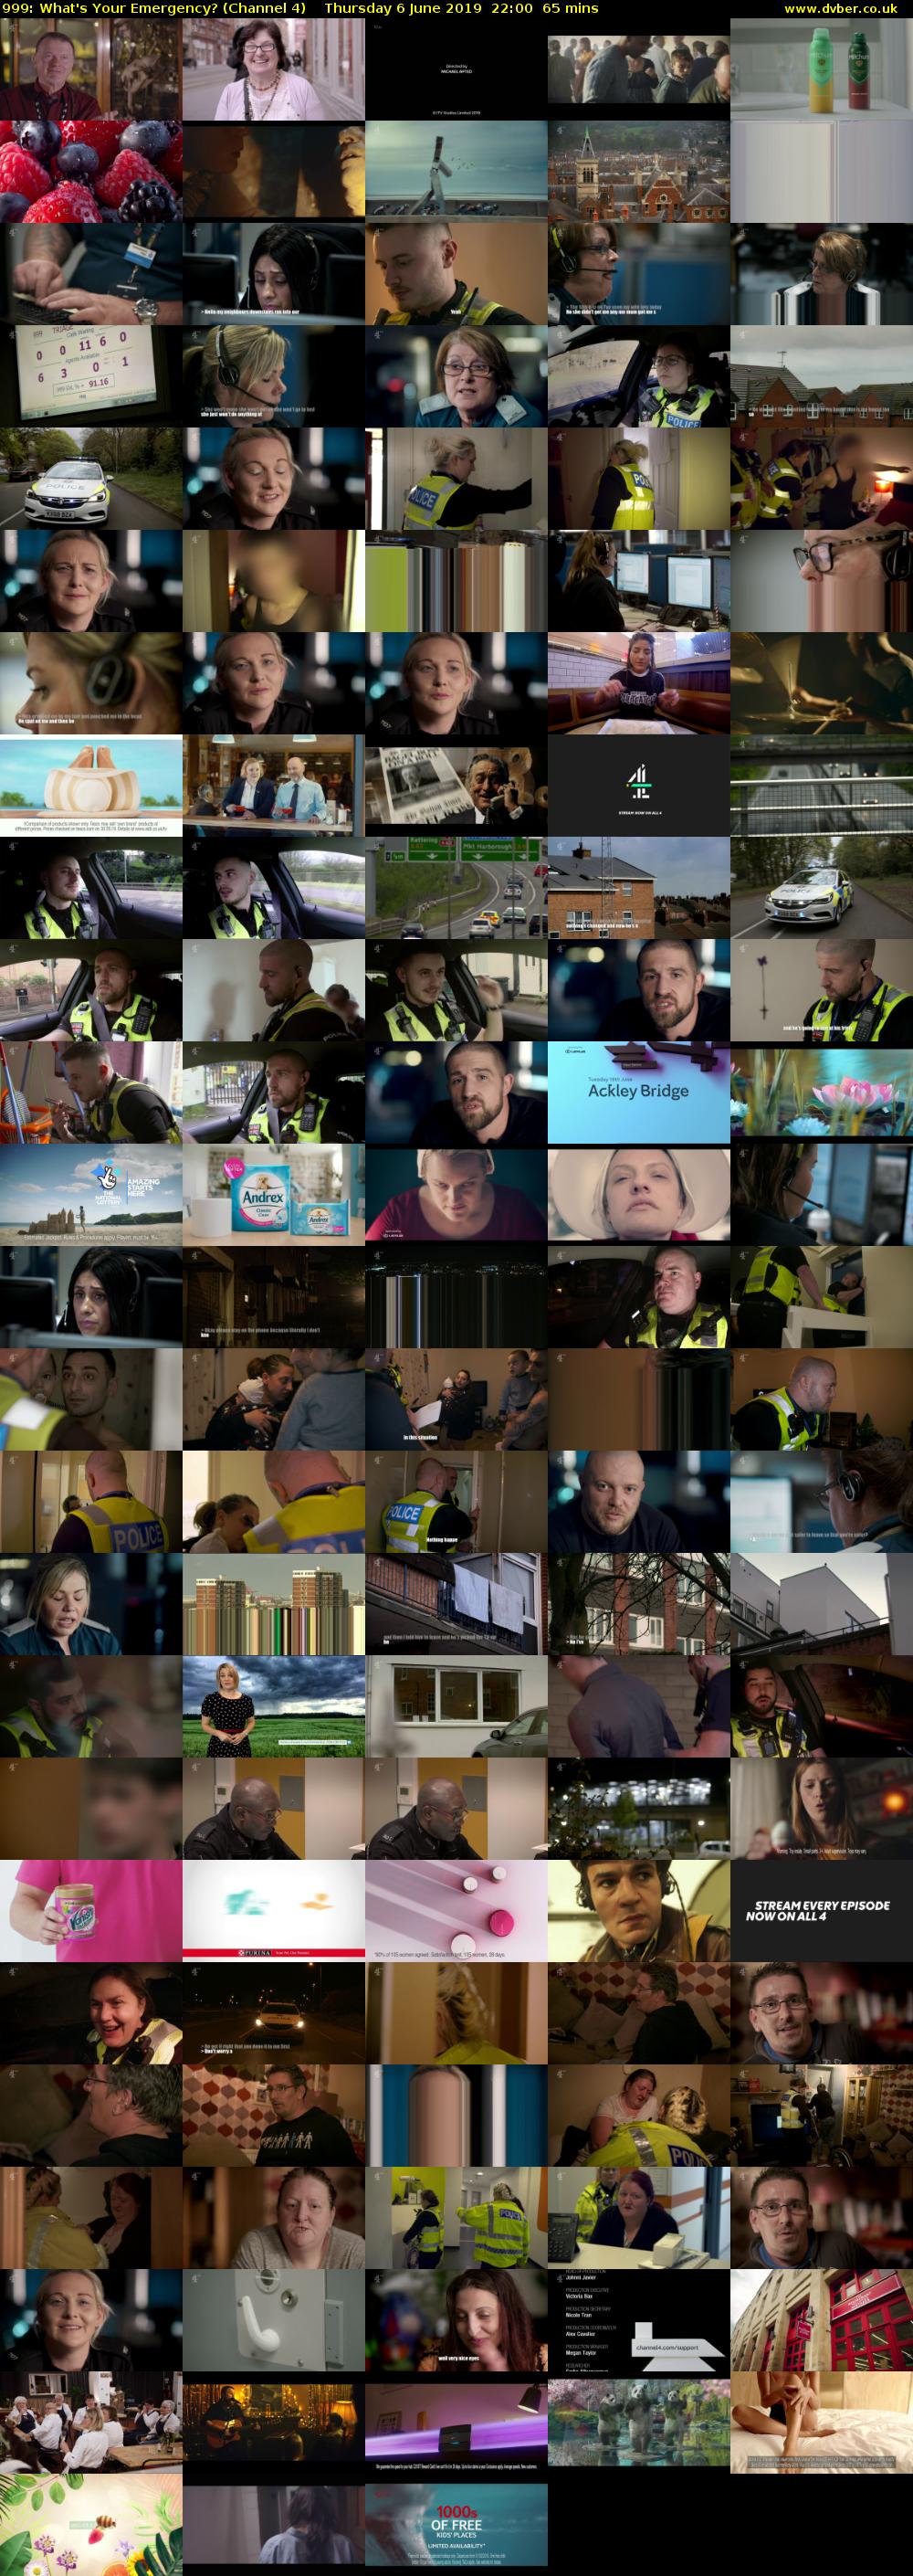 999: What's Your Emergency? (Channel 4) Thursday 6 June 2019 22:00 - 23:05